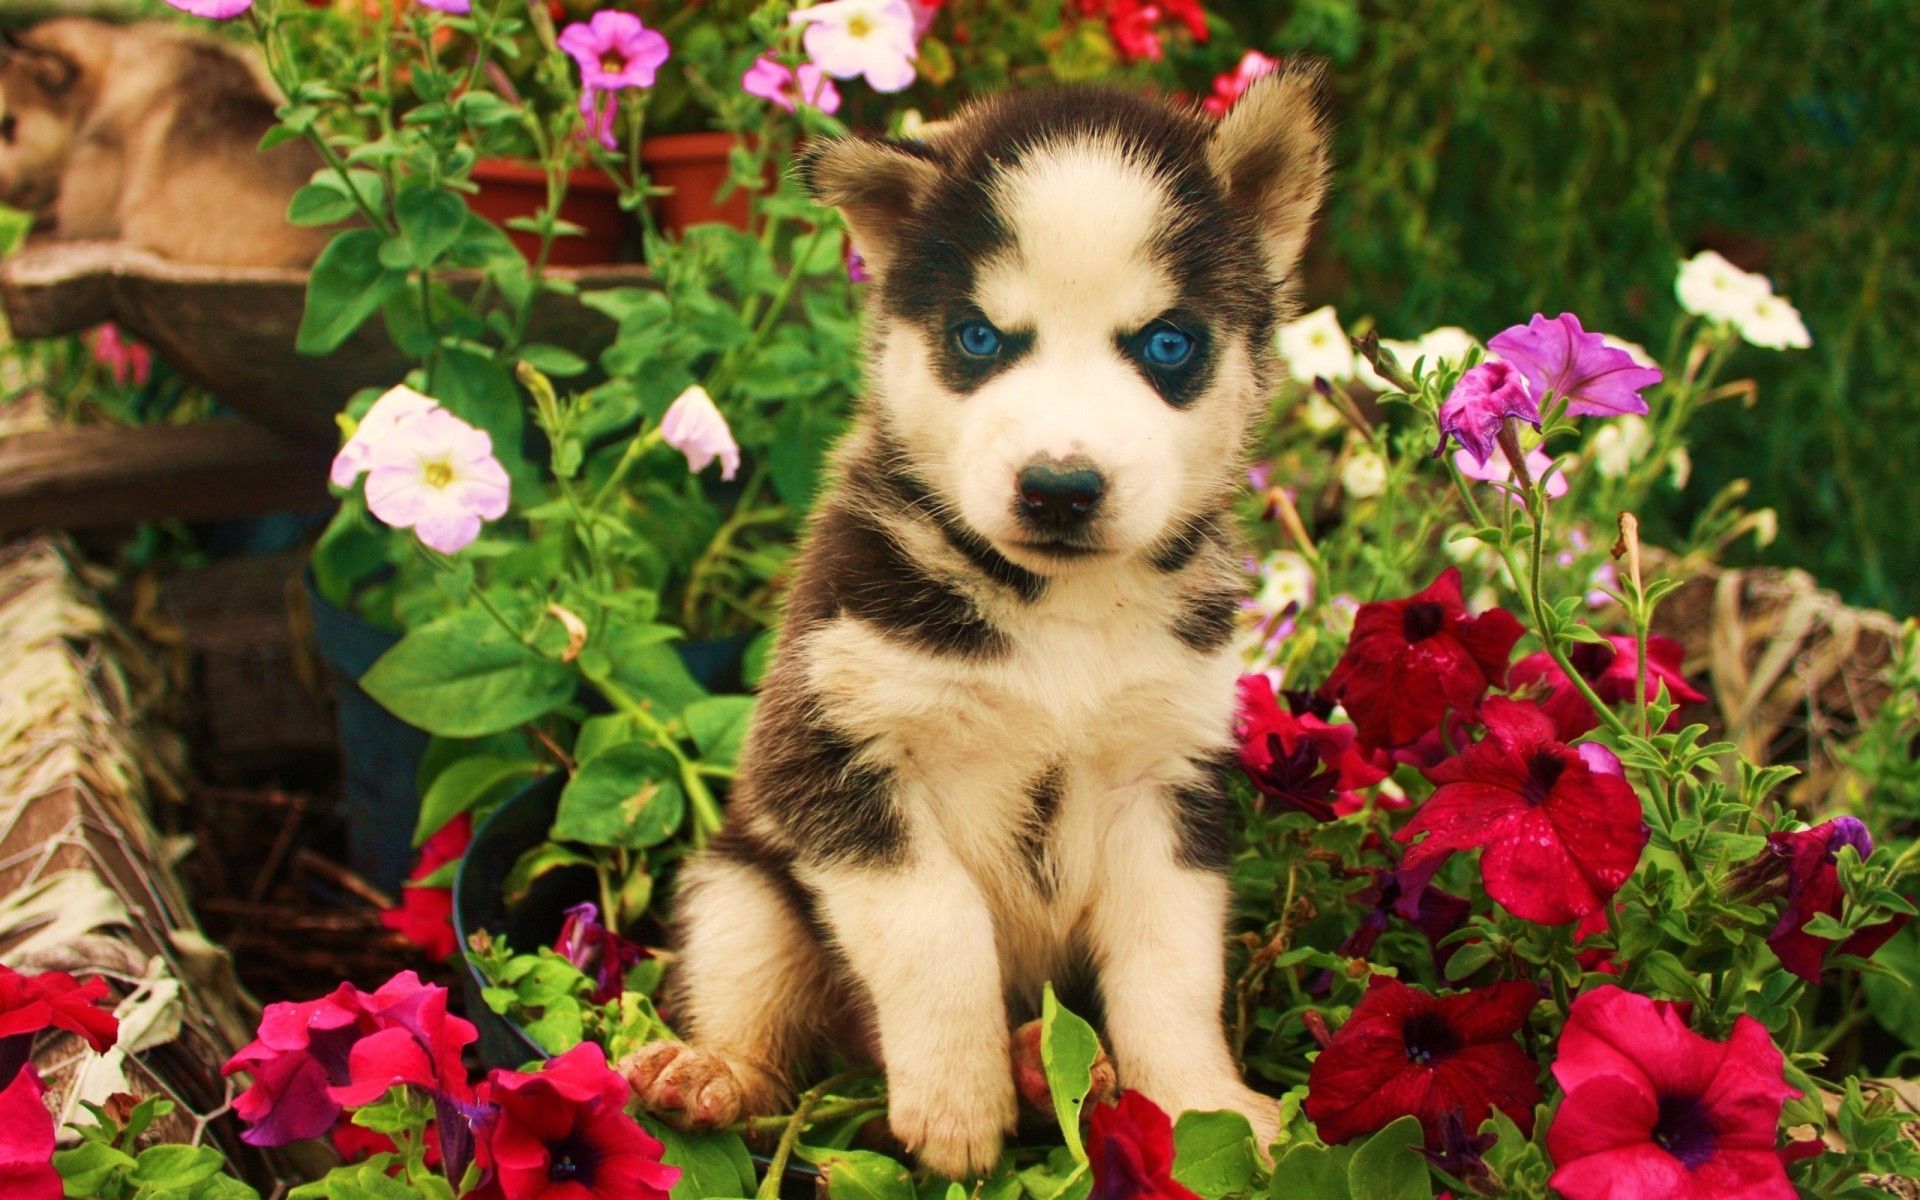 Free download Eyes animals dogs puppy blue flowers babies cute wallpaper 1920x1200 [1920x1200] for your Desktop, Mobile & Tablet. Explore Puppies and Flowers Wallpaper. Puppies in Flowers Computer Wallpaper